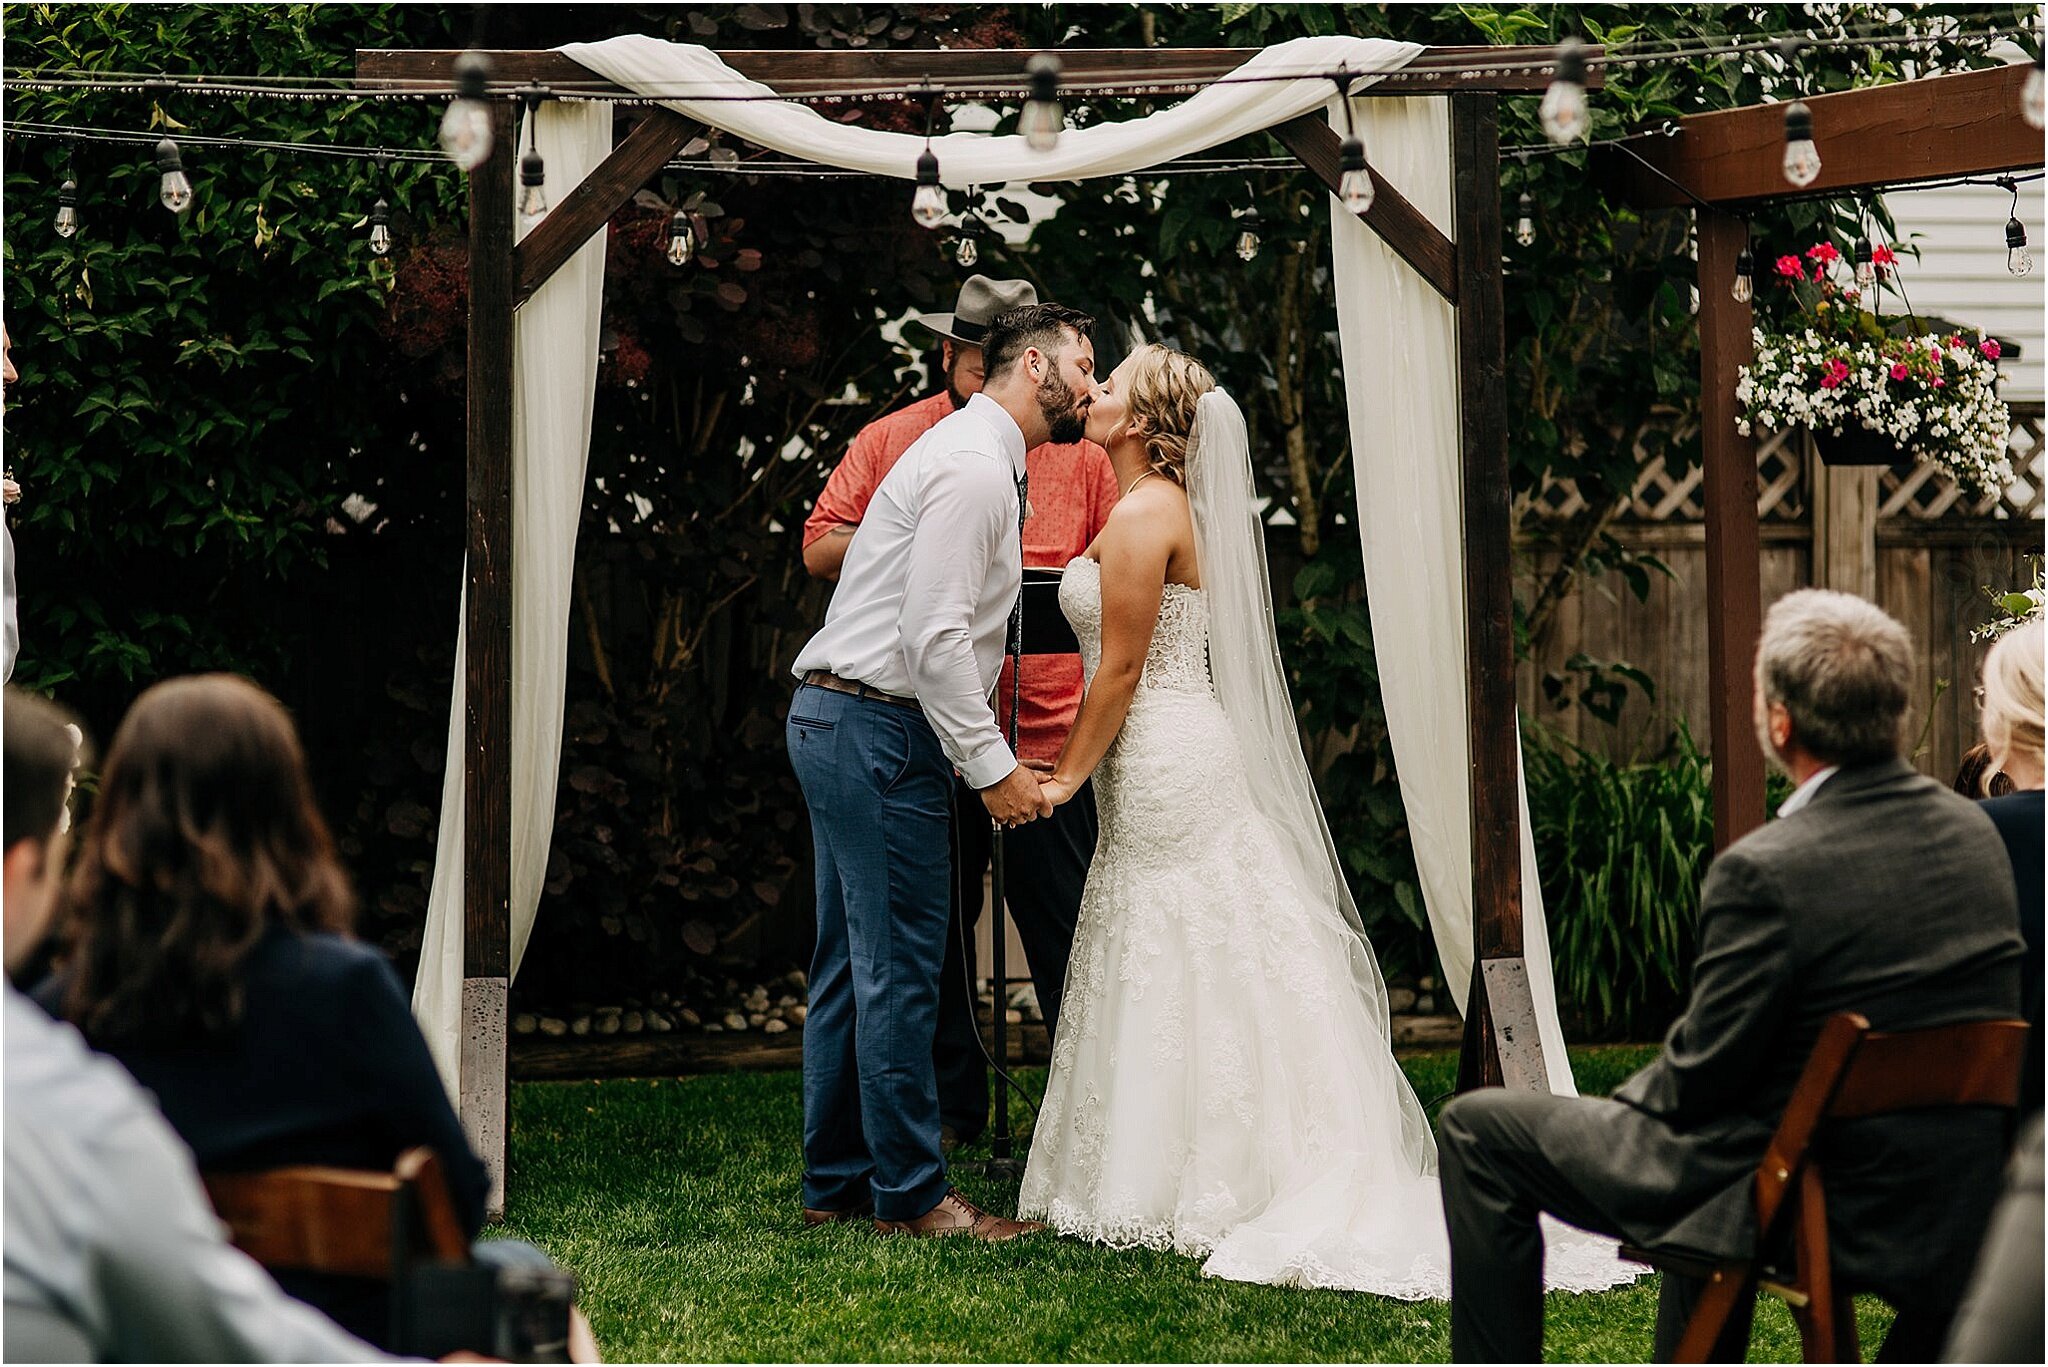 bride and groom kiss at end of ceremony in backyard wedding Surrey BC